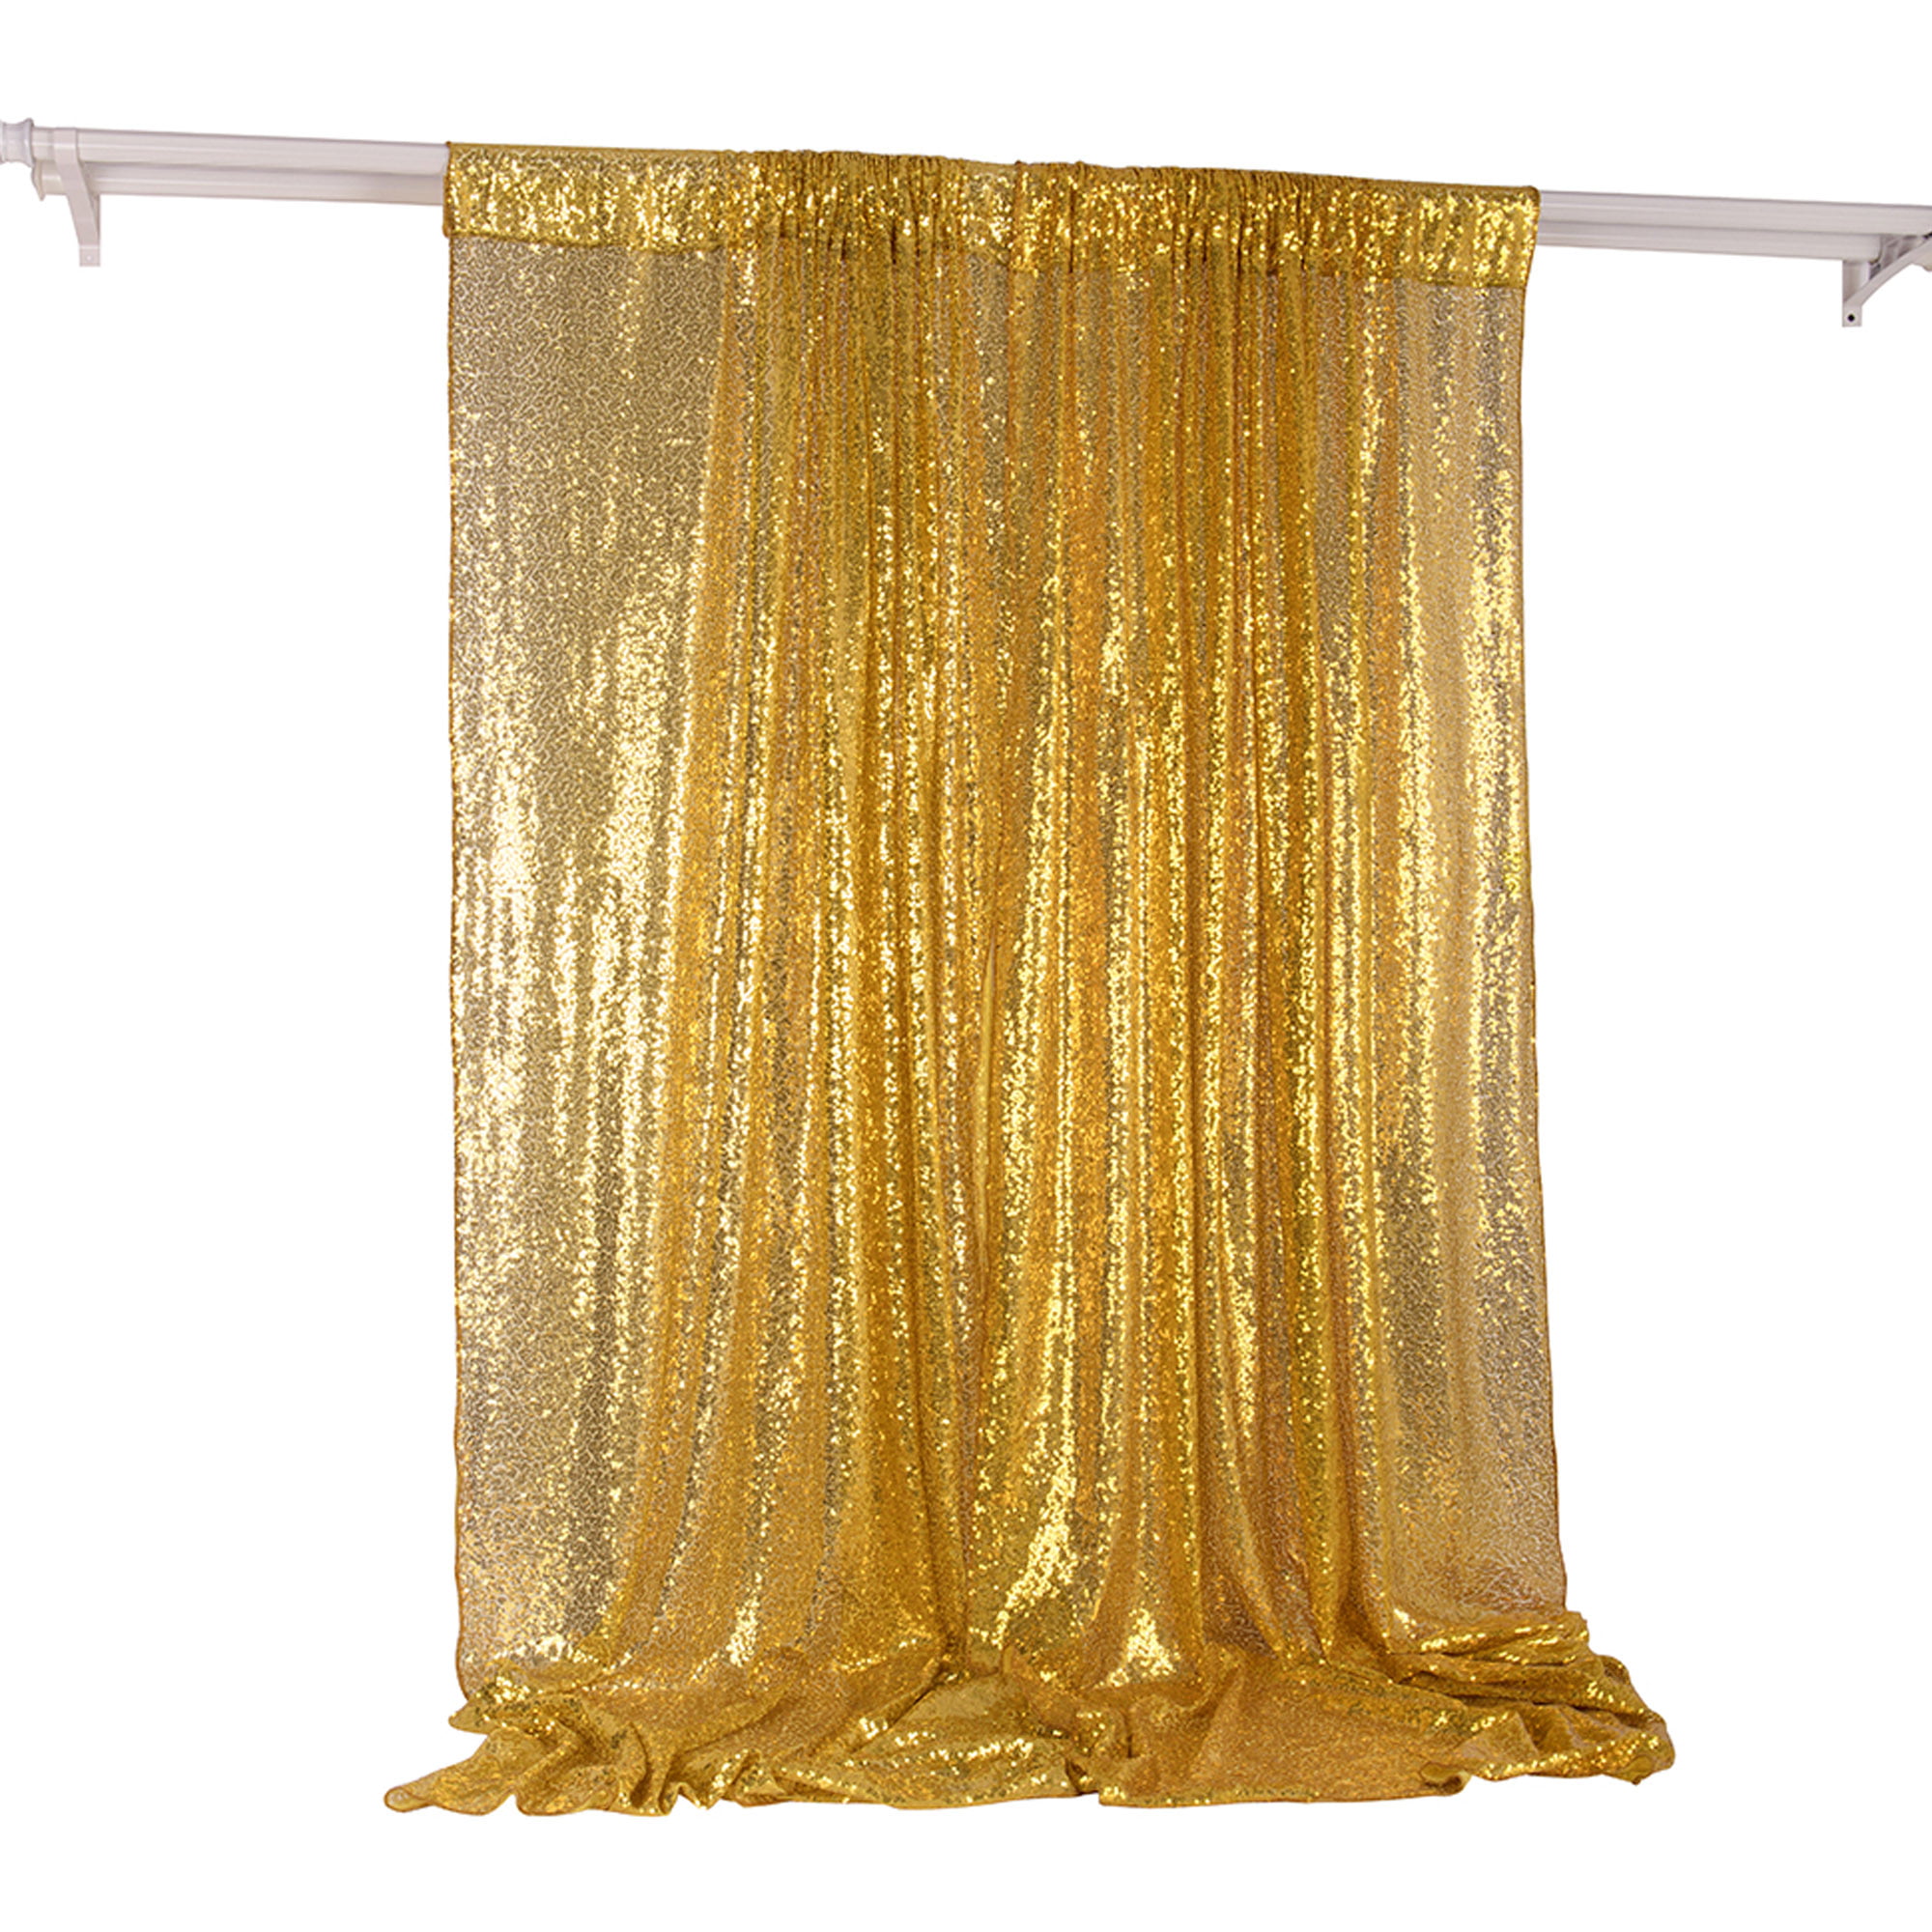 Gold Satin Poise3EHome 2 Panels 3FtX7Ft Not See Through Sequin Photography Backdrop Glittery Thick Satin Wedding Party Sequin Curtain 